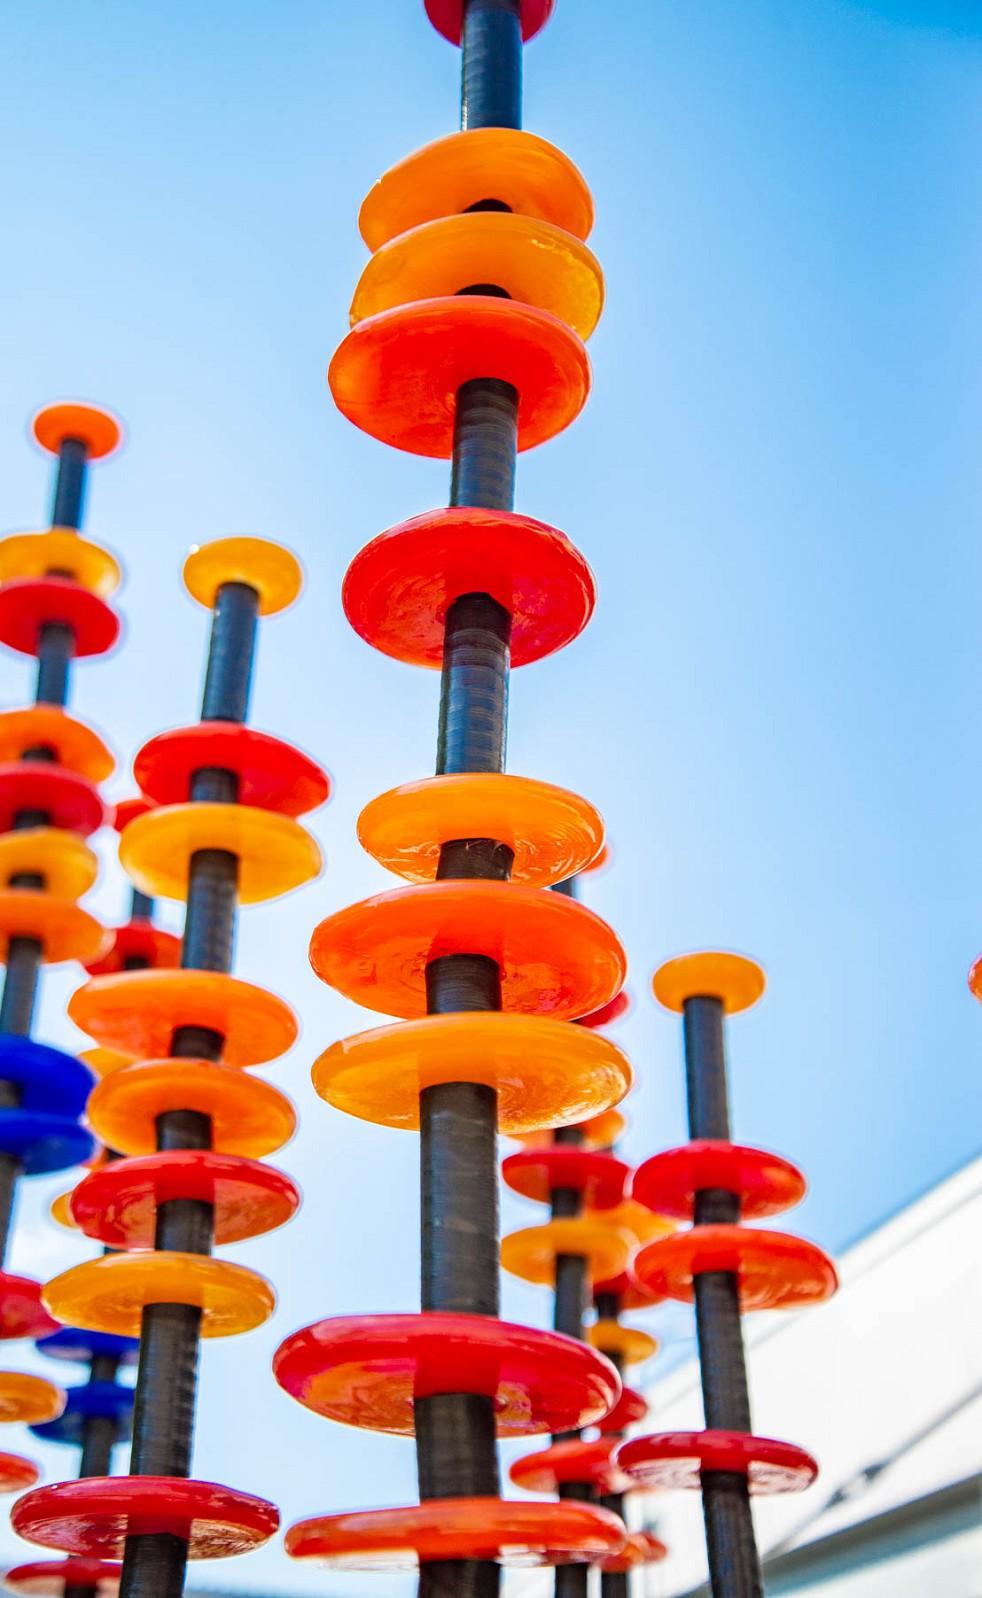 Hand blown glass rings of bright red, orange, yellow and blue are stacked organically on ten stems in this brilliant outdoor sculpture by Susan Rankin. The stems are fixed to a steel plate and sway gently in the breeze. Each column includes the hand